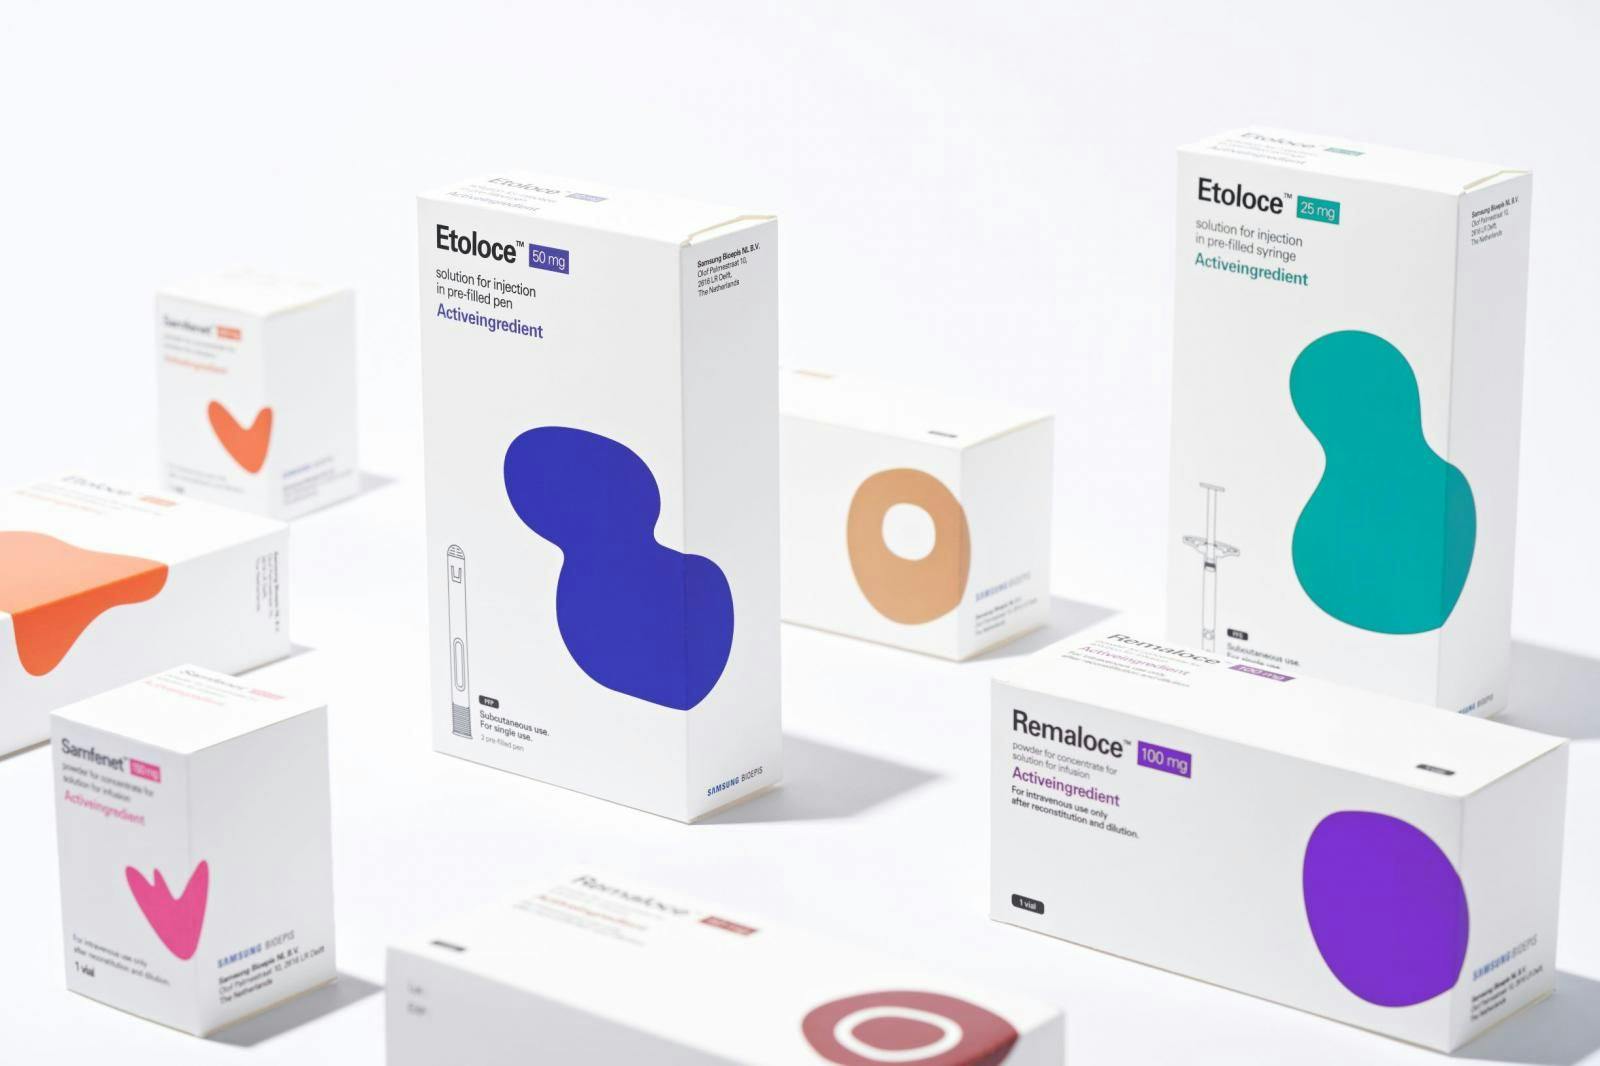 Samsung Bioepis Appeals to Patients Through Package Design